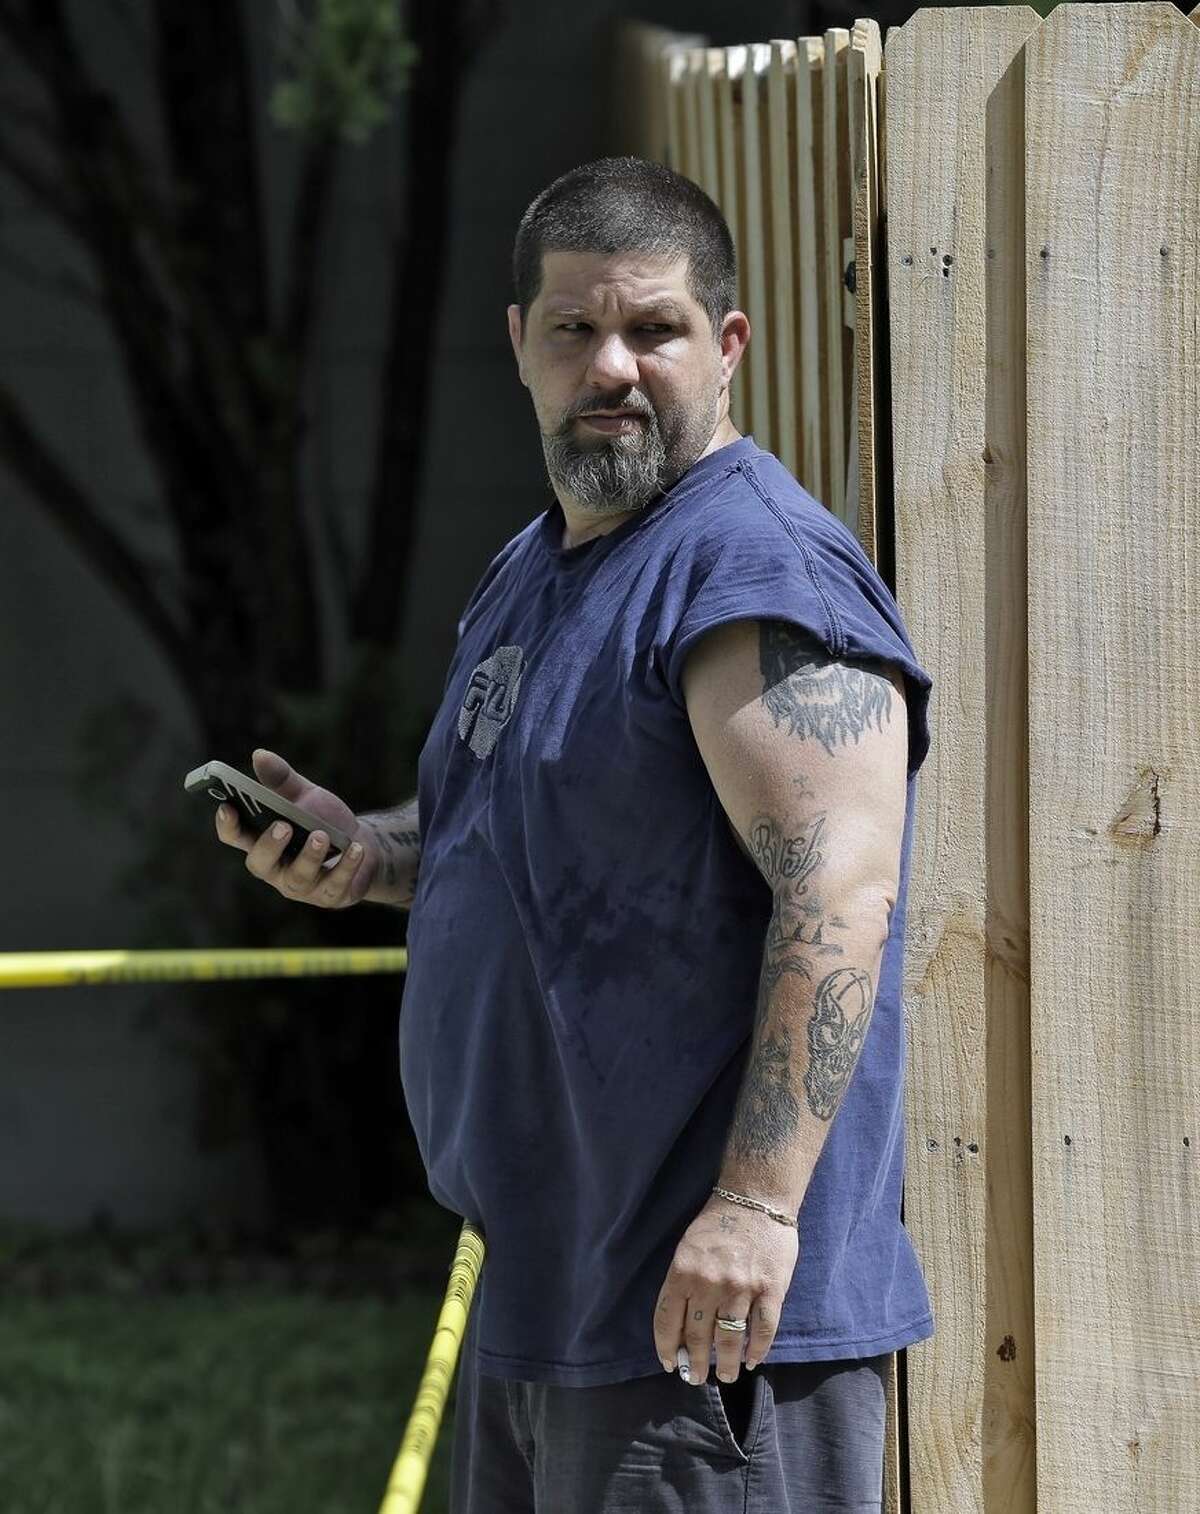 Jeremy Bush watches as members of the Hillsborough County Code Enforcement survey the property where a sinkhole reopened, Wednesday, Aug. 19, 2015, in Seffner, Fla. The sinkhole reopened in the exact same location where one swallowed Jeremy's brother Jeffrey Bush, as he slept in his bed more than two years ago. The new hole is 17 feet wide by 20 feet deep, according to code enforcement director Ron Spiller. In March 2013, Jeffrey Bush was asleep in his bedroom on the property when the floor collapsed and he fell in. His body was never recovered. (AP Photo/Chris O'Meara)